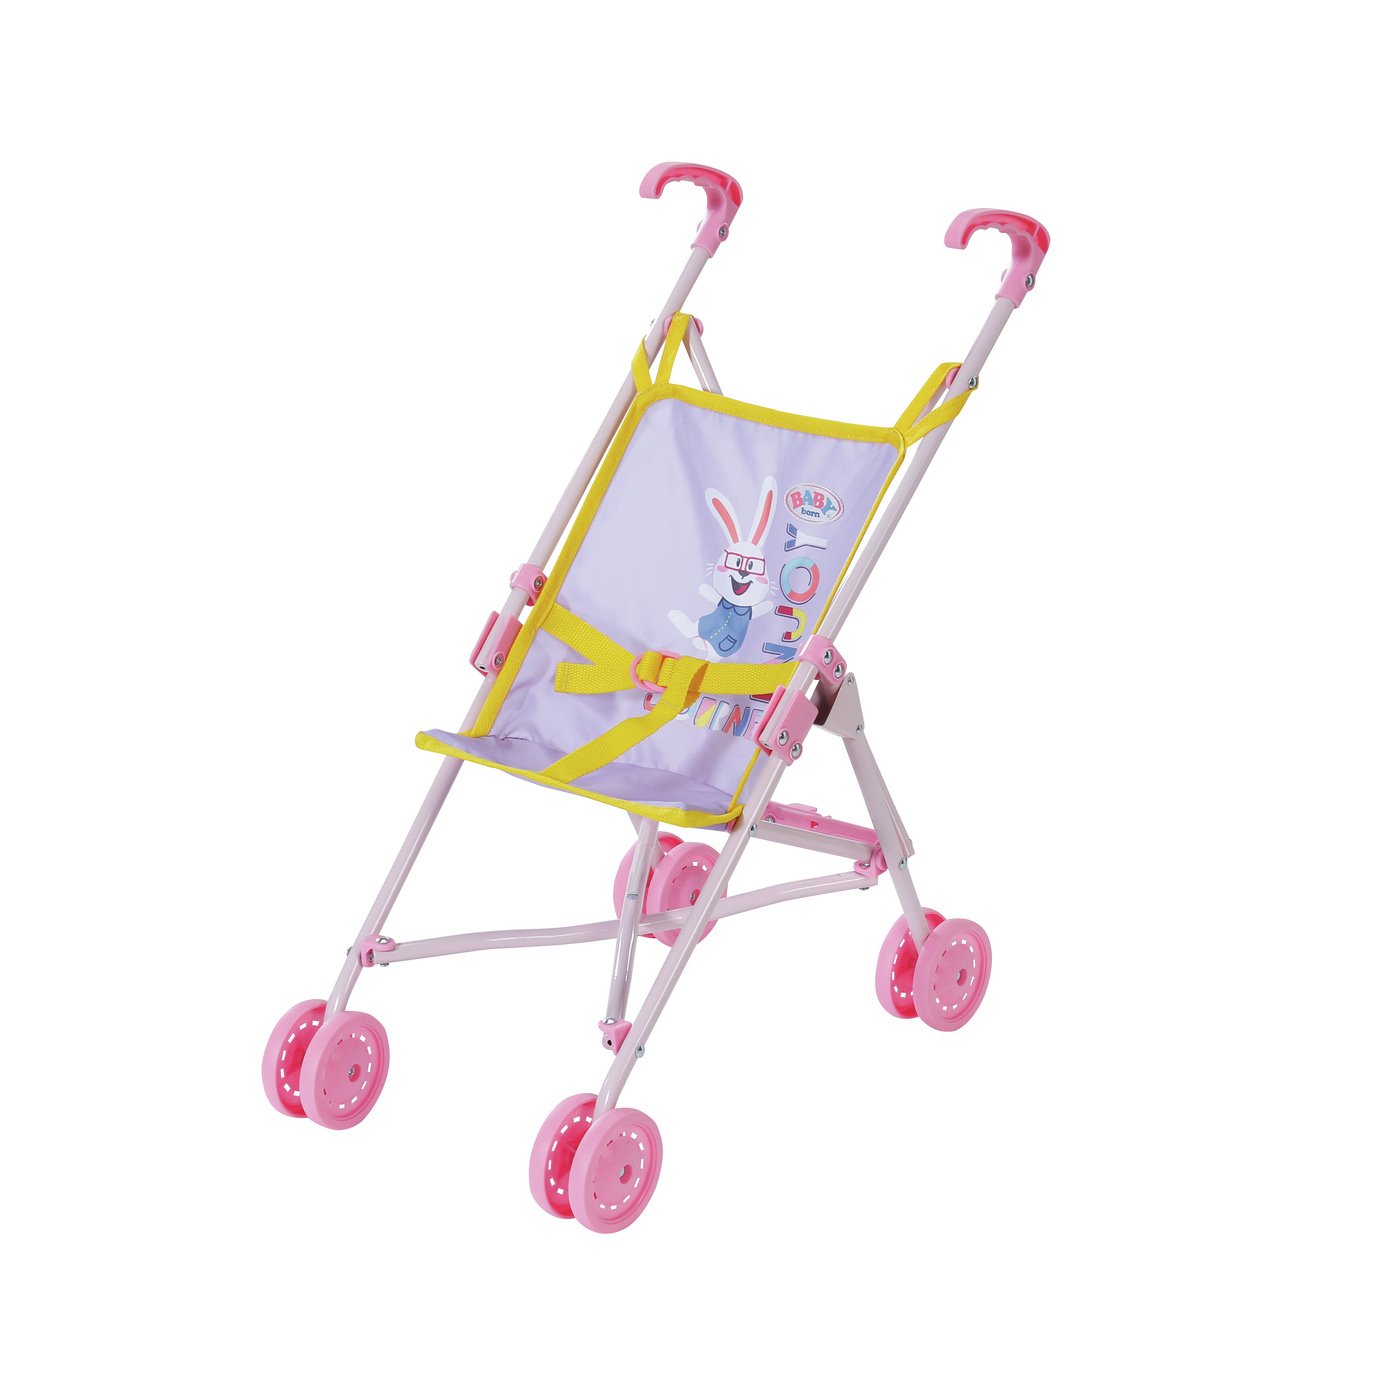 BABY born Dolls Stroller Review